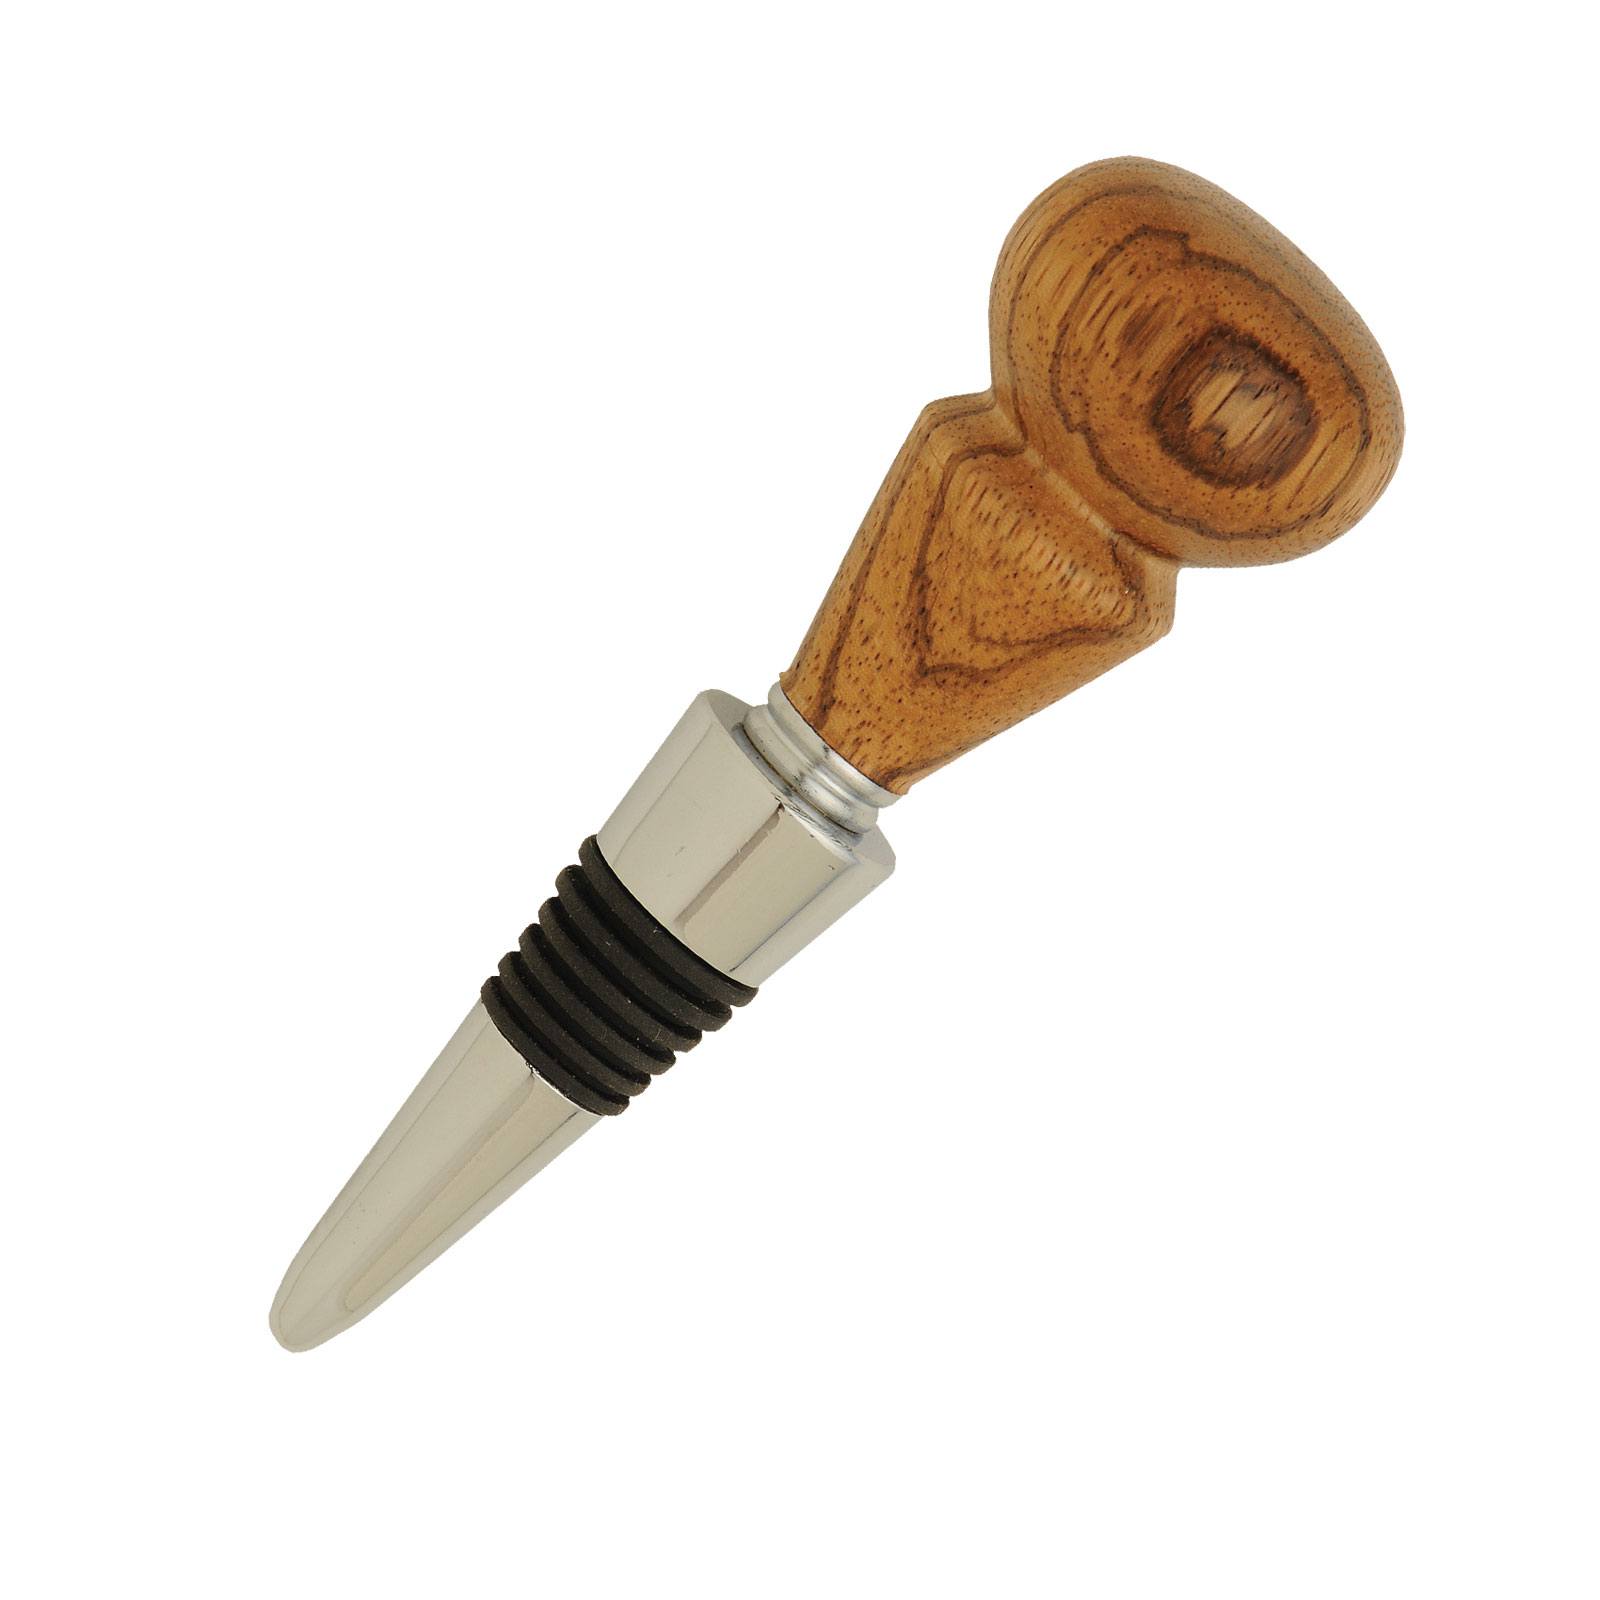 X2 Personalized MAPLE WOOD WINE BOTTLE STOPPER engraved 